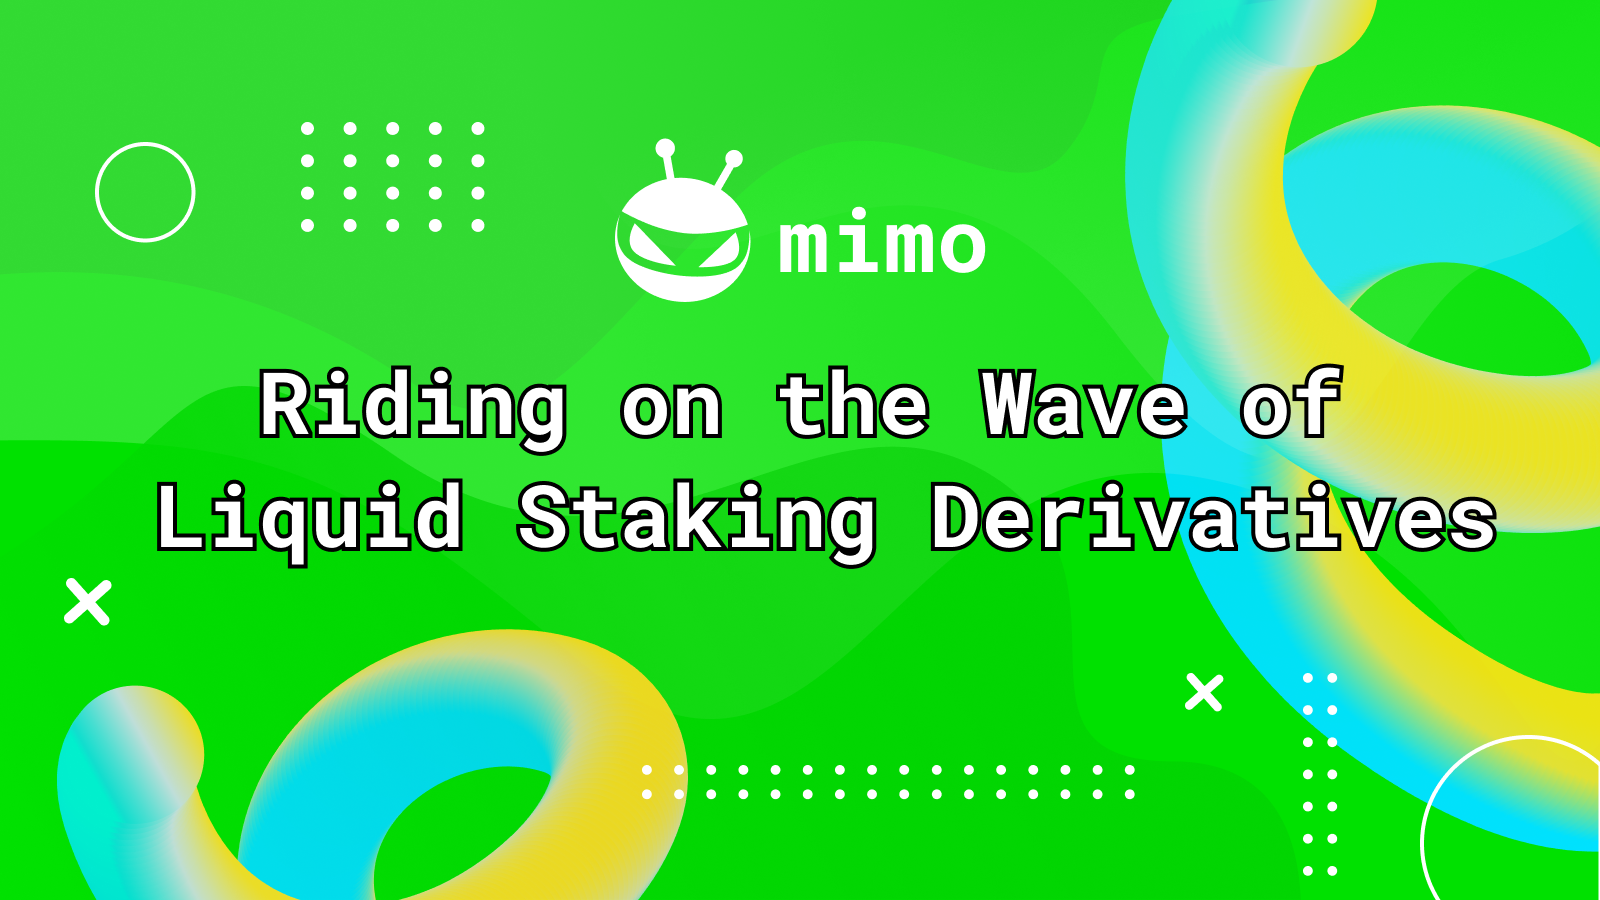 mimo Protocol: Riding on the Wave of Liquid Staking Derivatives